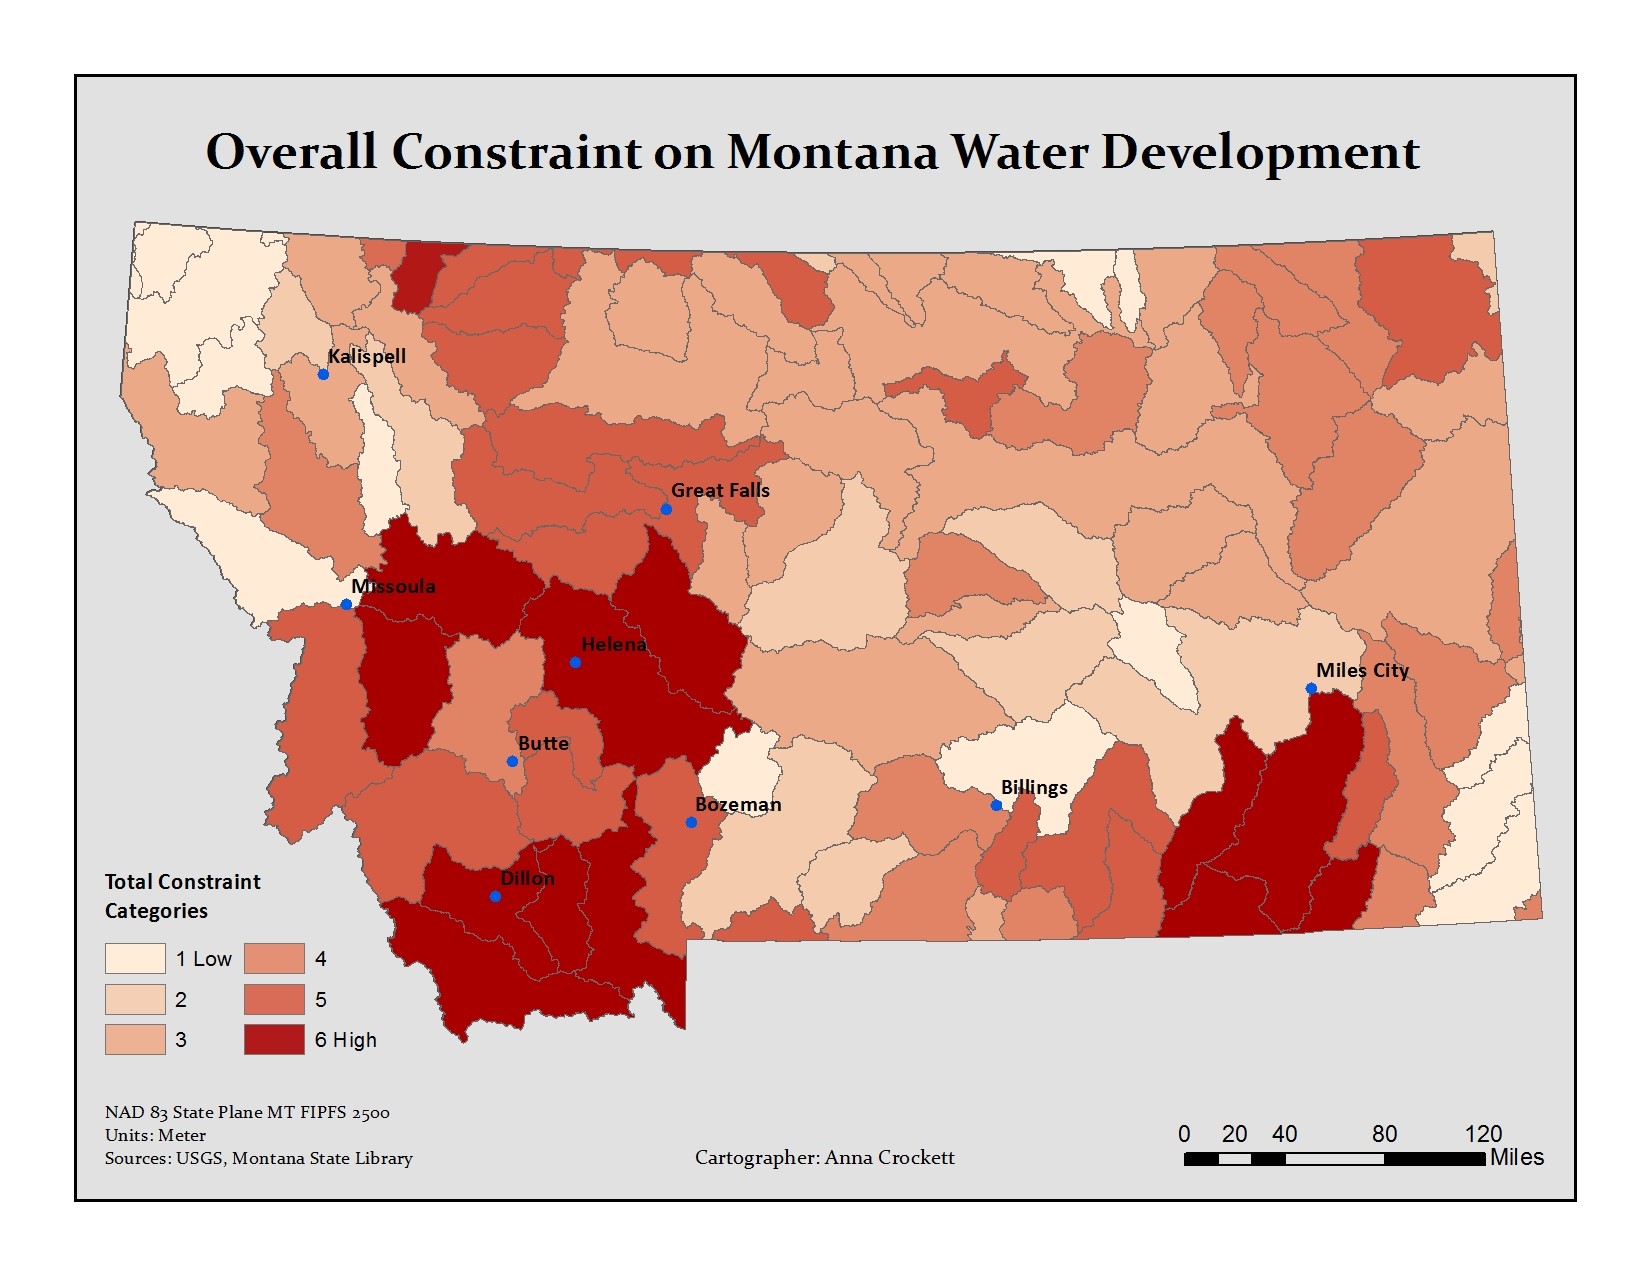 Figure 1. Aggregated legal constraints on Montana water use and development